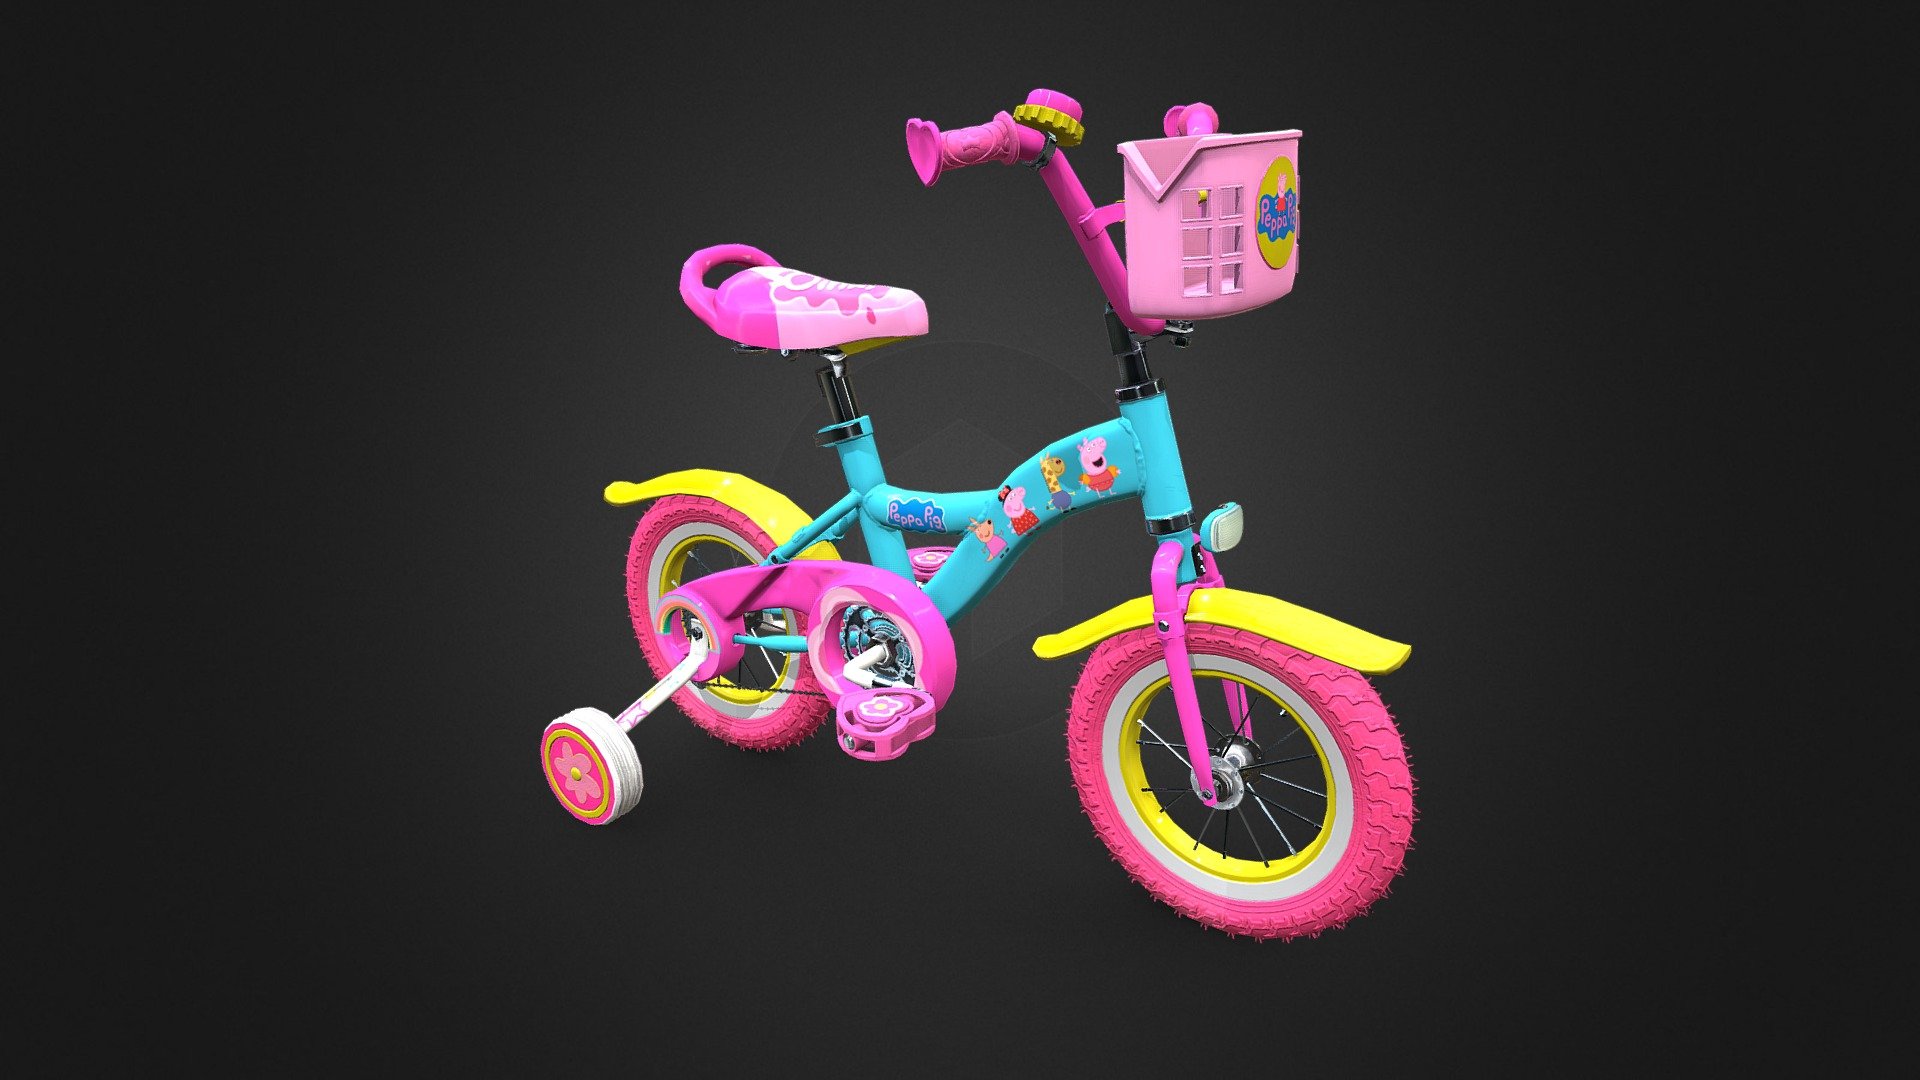 Sculpt : ZBrush 

Retopology : 3D-Coat

Unwrapping : RizomUV

Baking : Substance Painter

PBR : Substance Painter

Stickers : Photoshop

Smoothing : 3DS Max - Kid's Training Bike - 3D model by hansolocambo 3d model